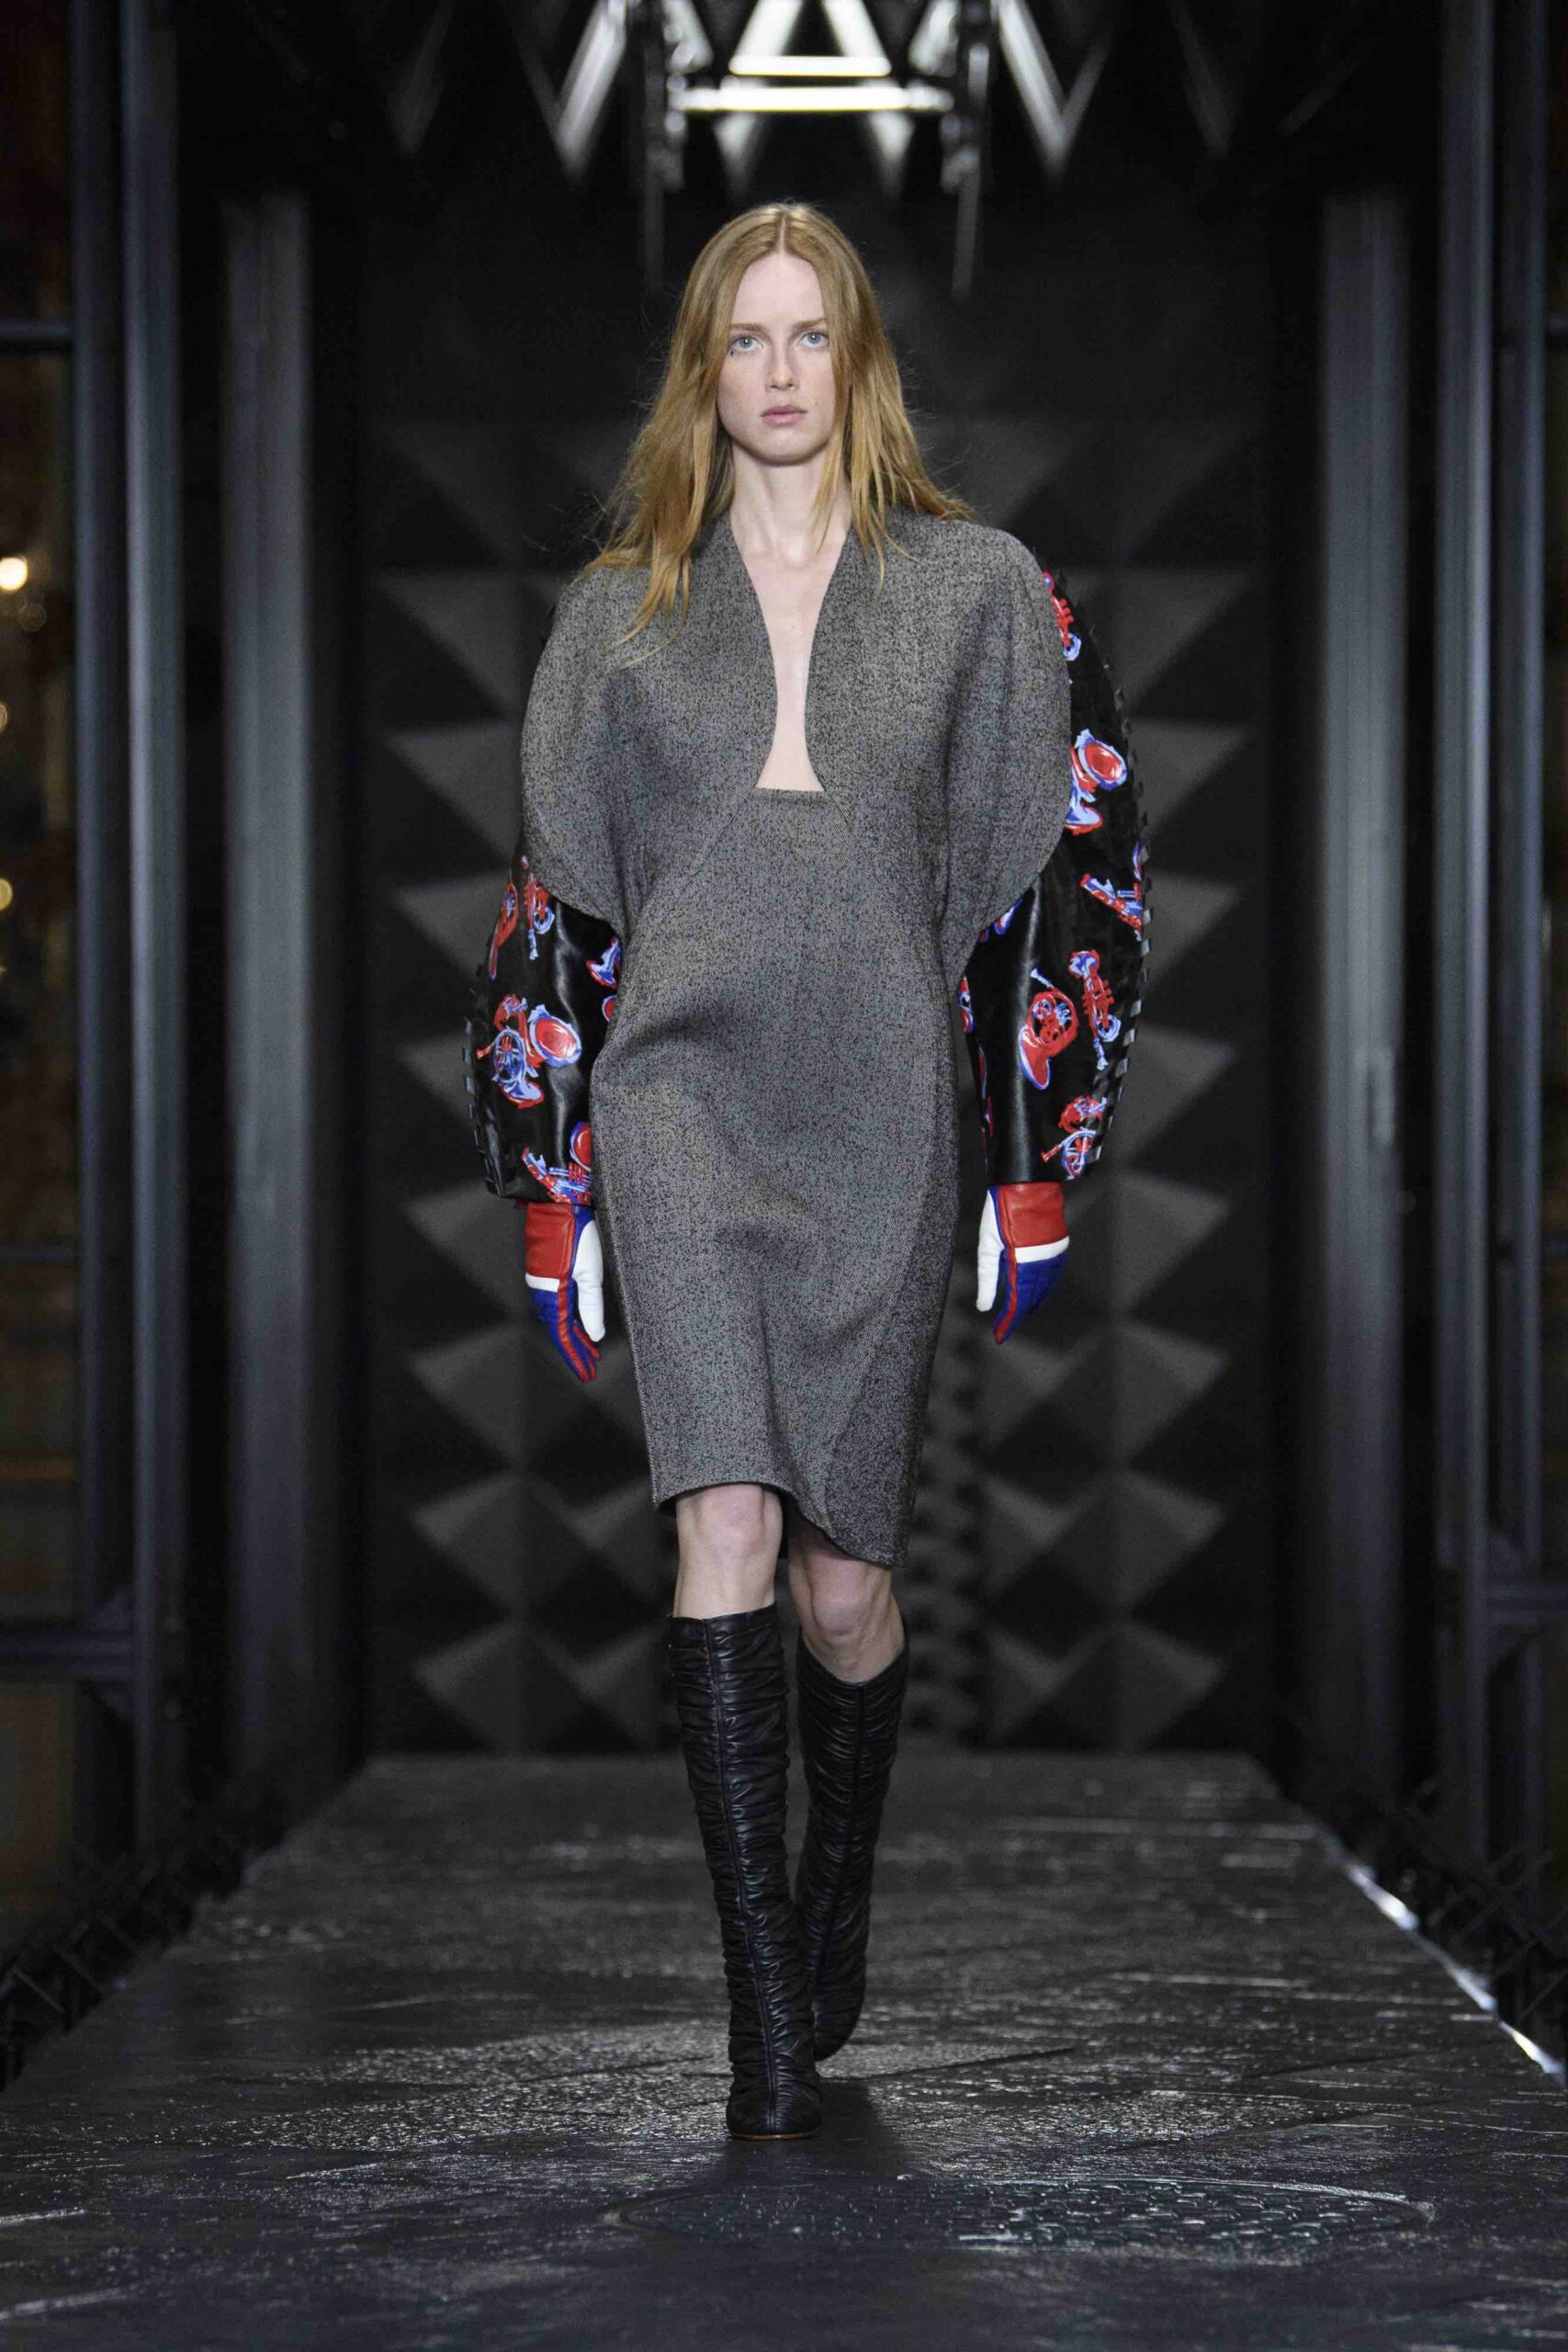 MANIFESTO - WHAT IS FRENCH STYLE?: Louis Vuitton's Fall-Winter